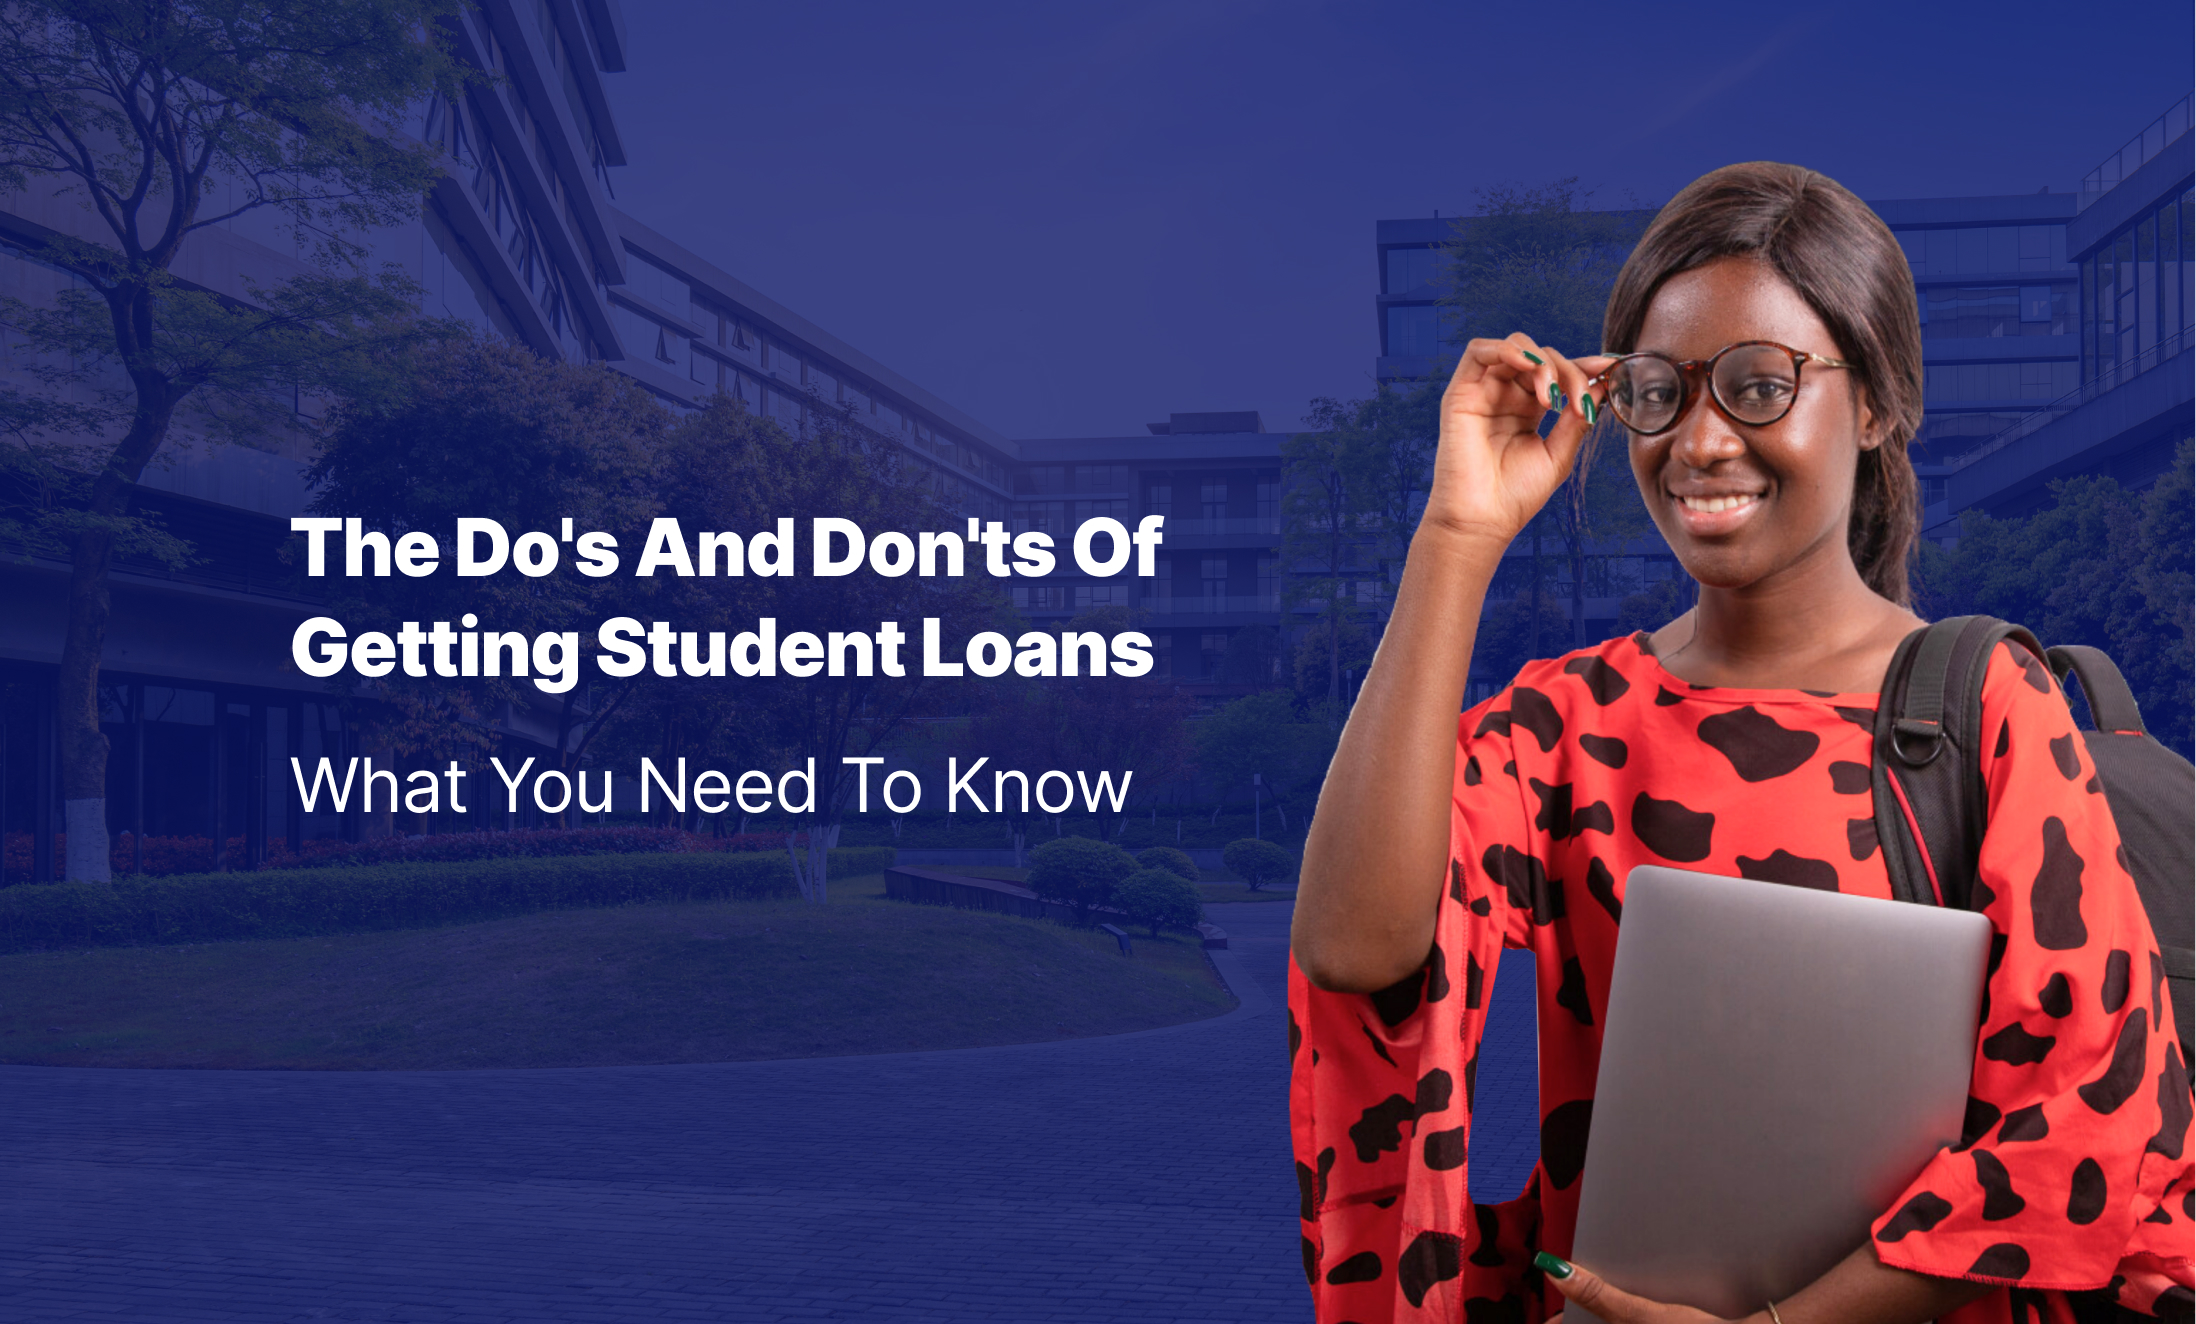 The Dos and Don’ts of Student Loans. What You Need to Know